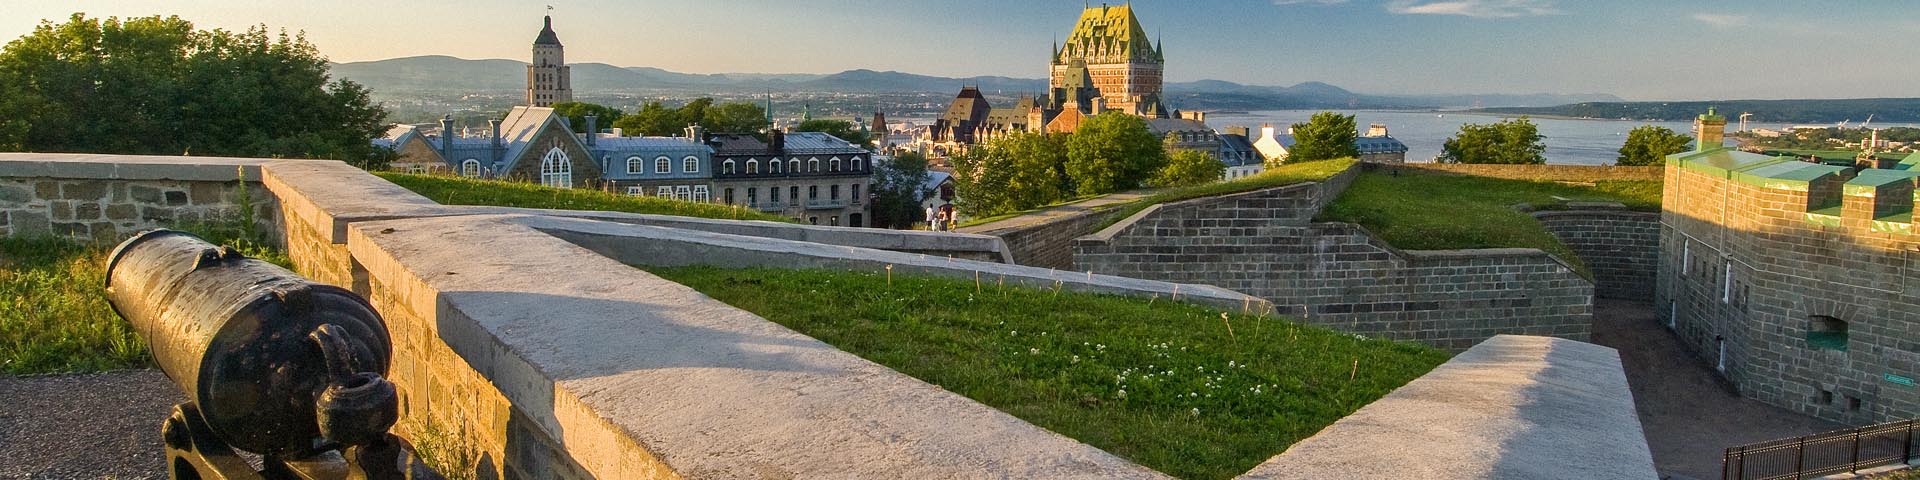 A view from the fortifications of Quebec